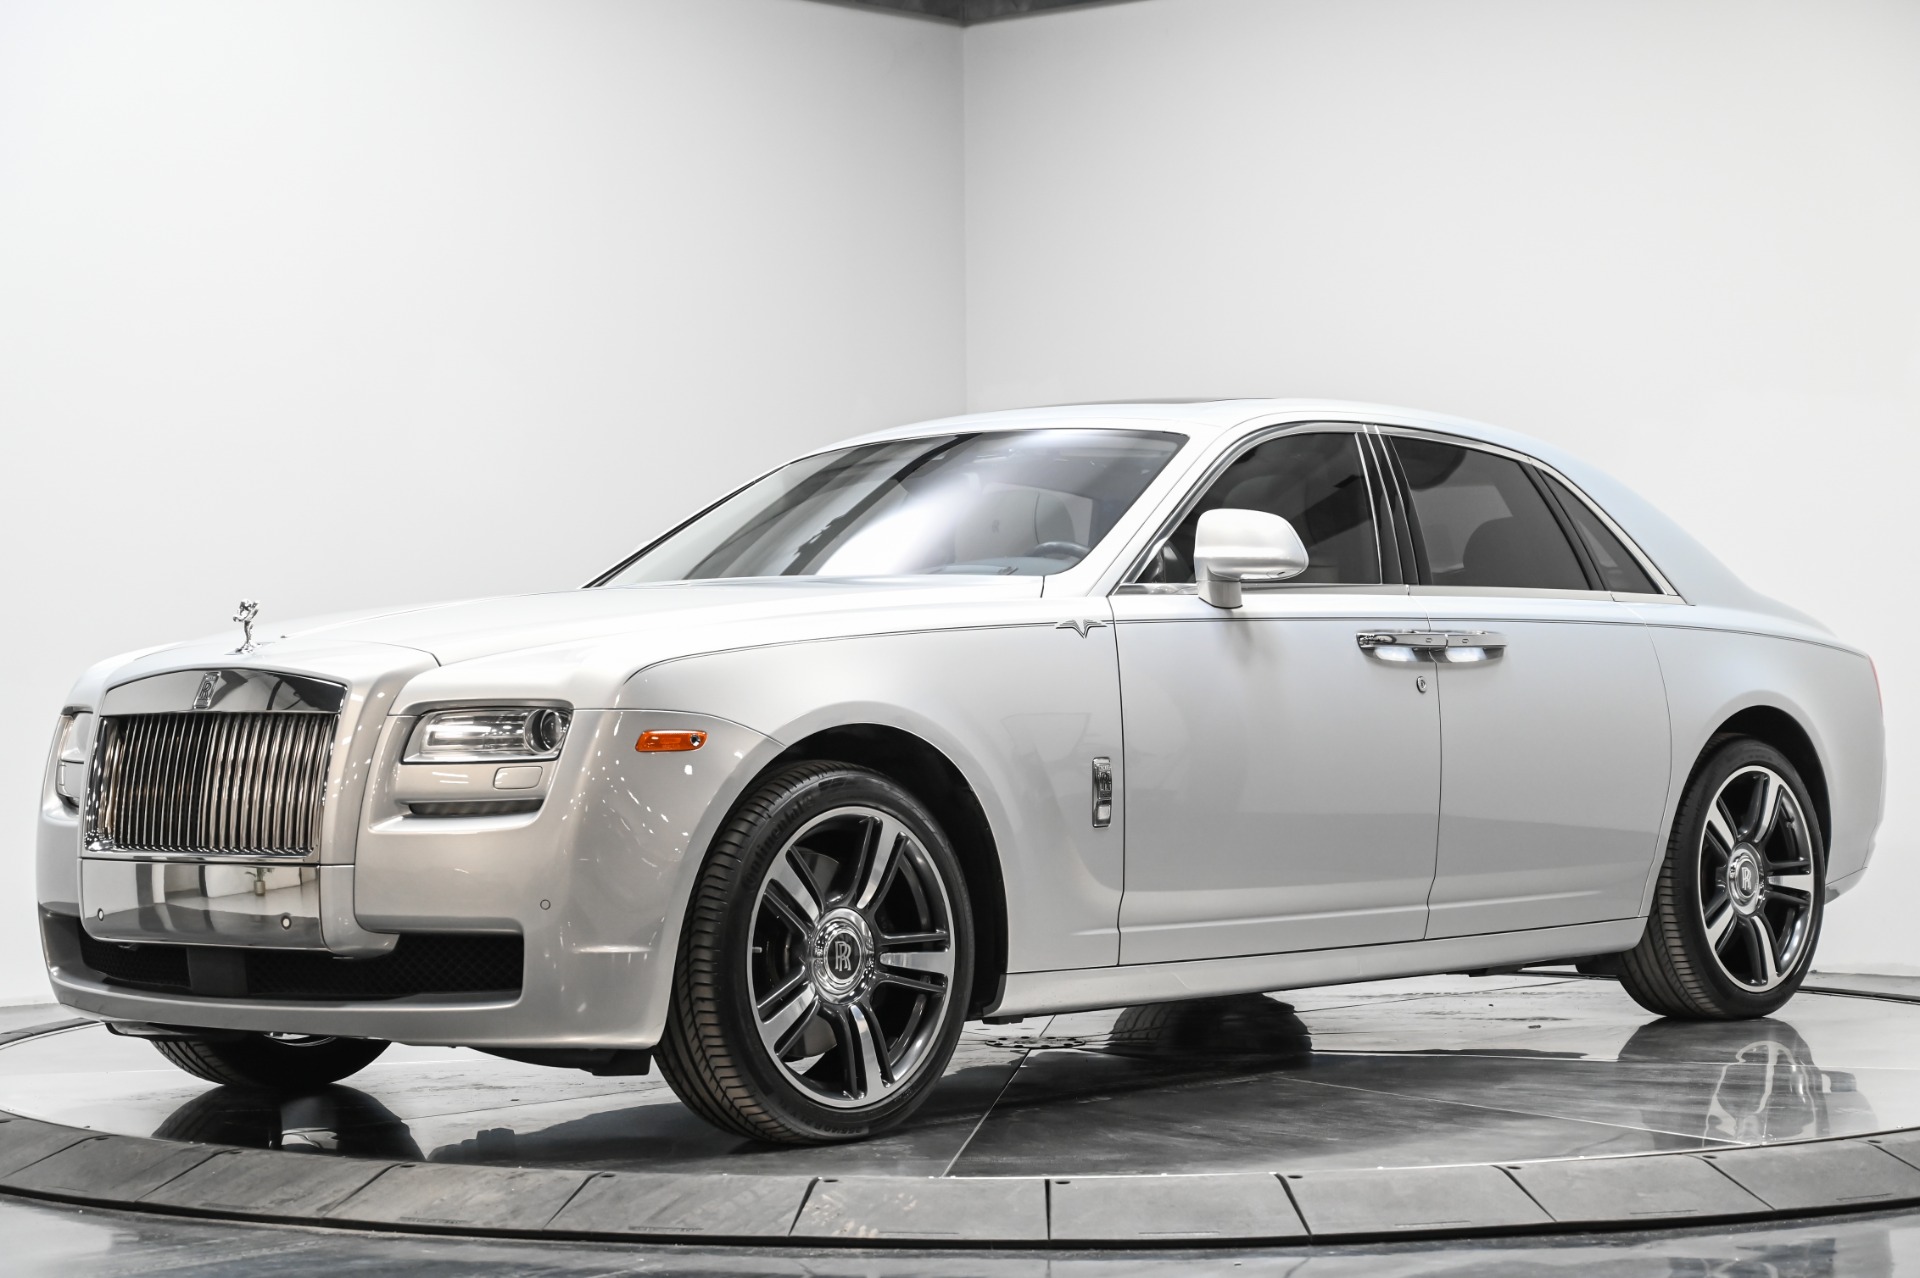 Rolls-Royce's New $300,000 Ghost Is Absolutely Loaded With Technology  [PHOTOS]